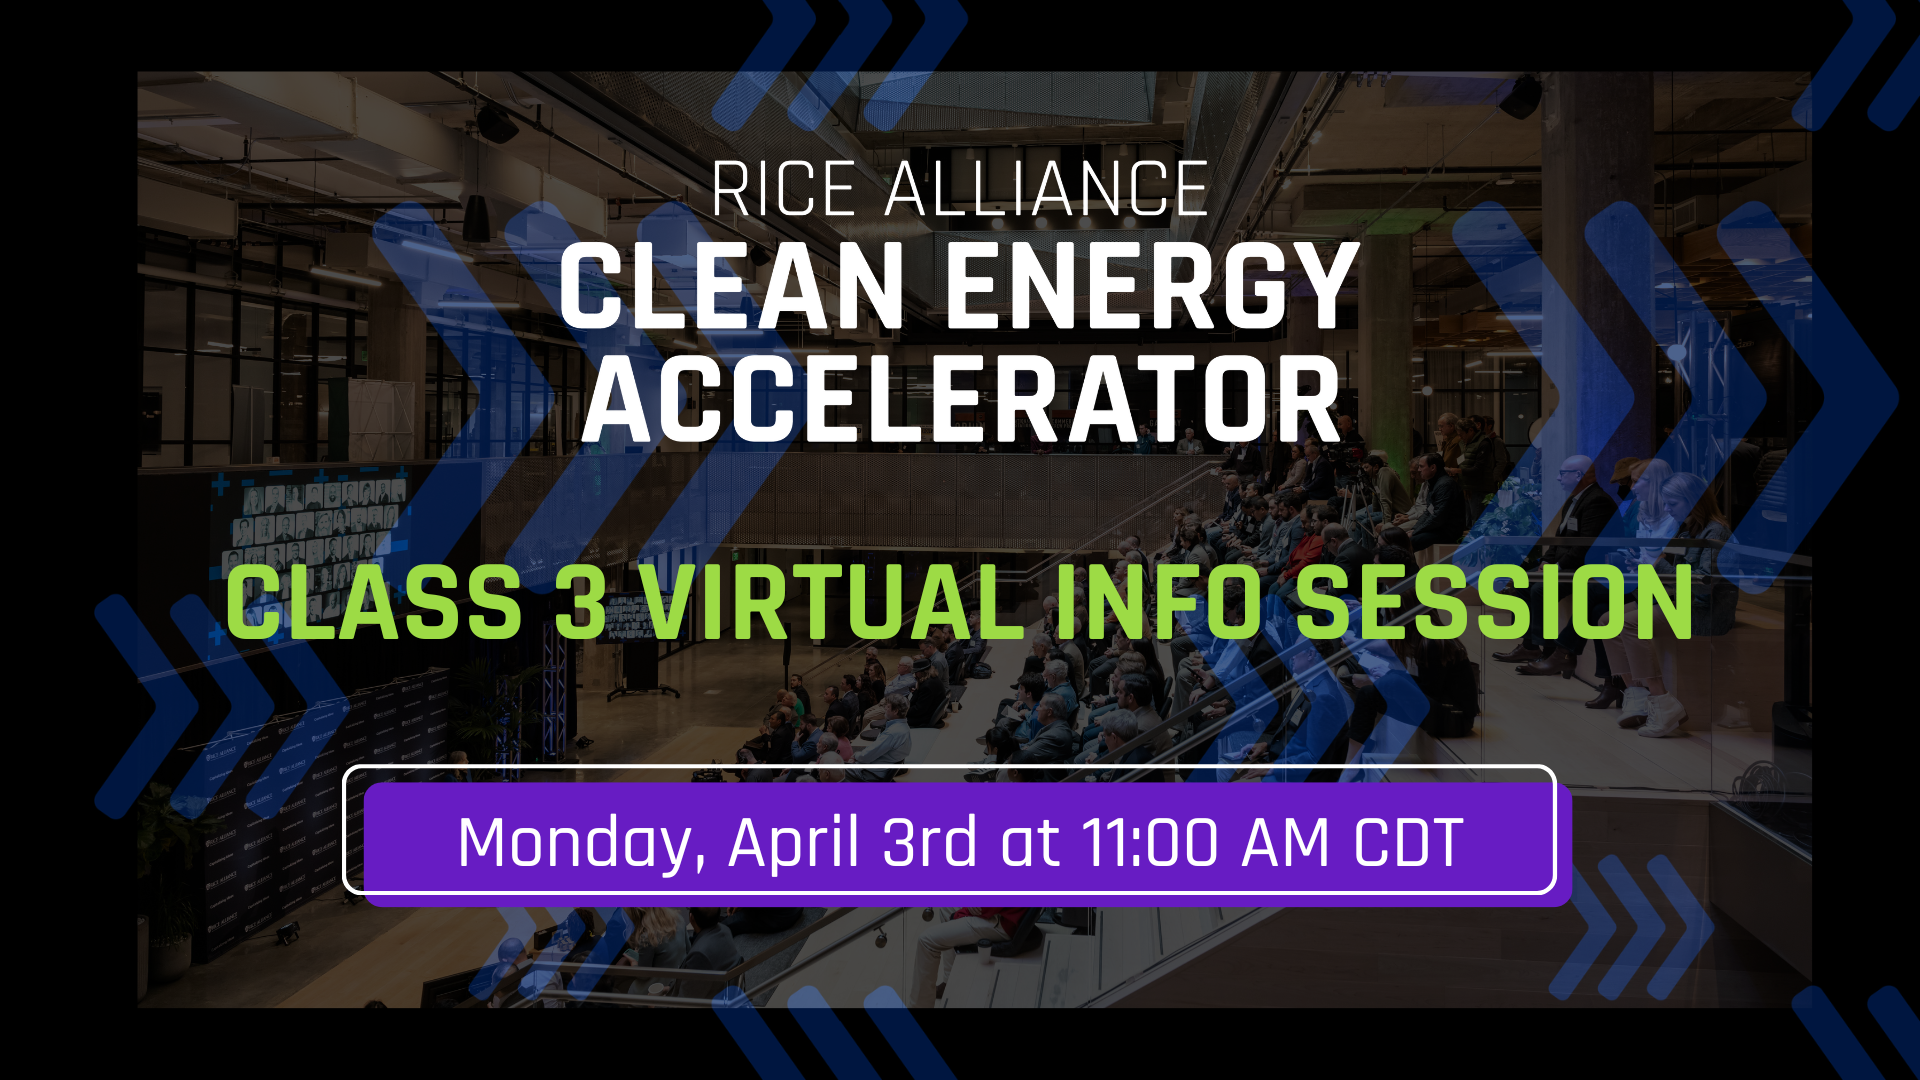 Rice alliance Clean Energy Accelerator Class 3 Virtual Info Session April 3rd at 11 am 